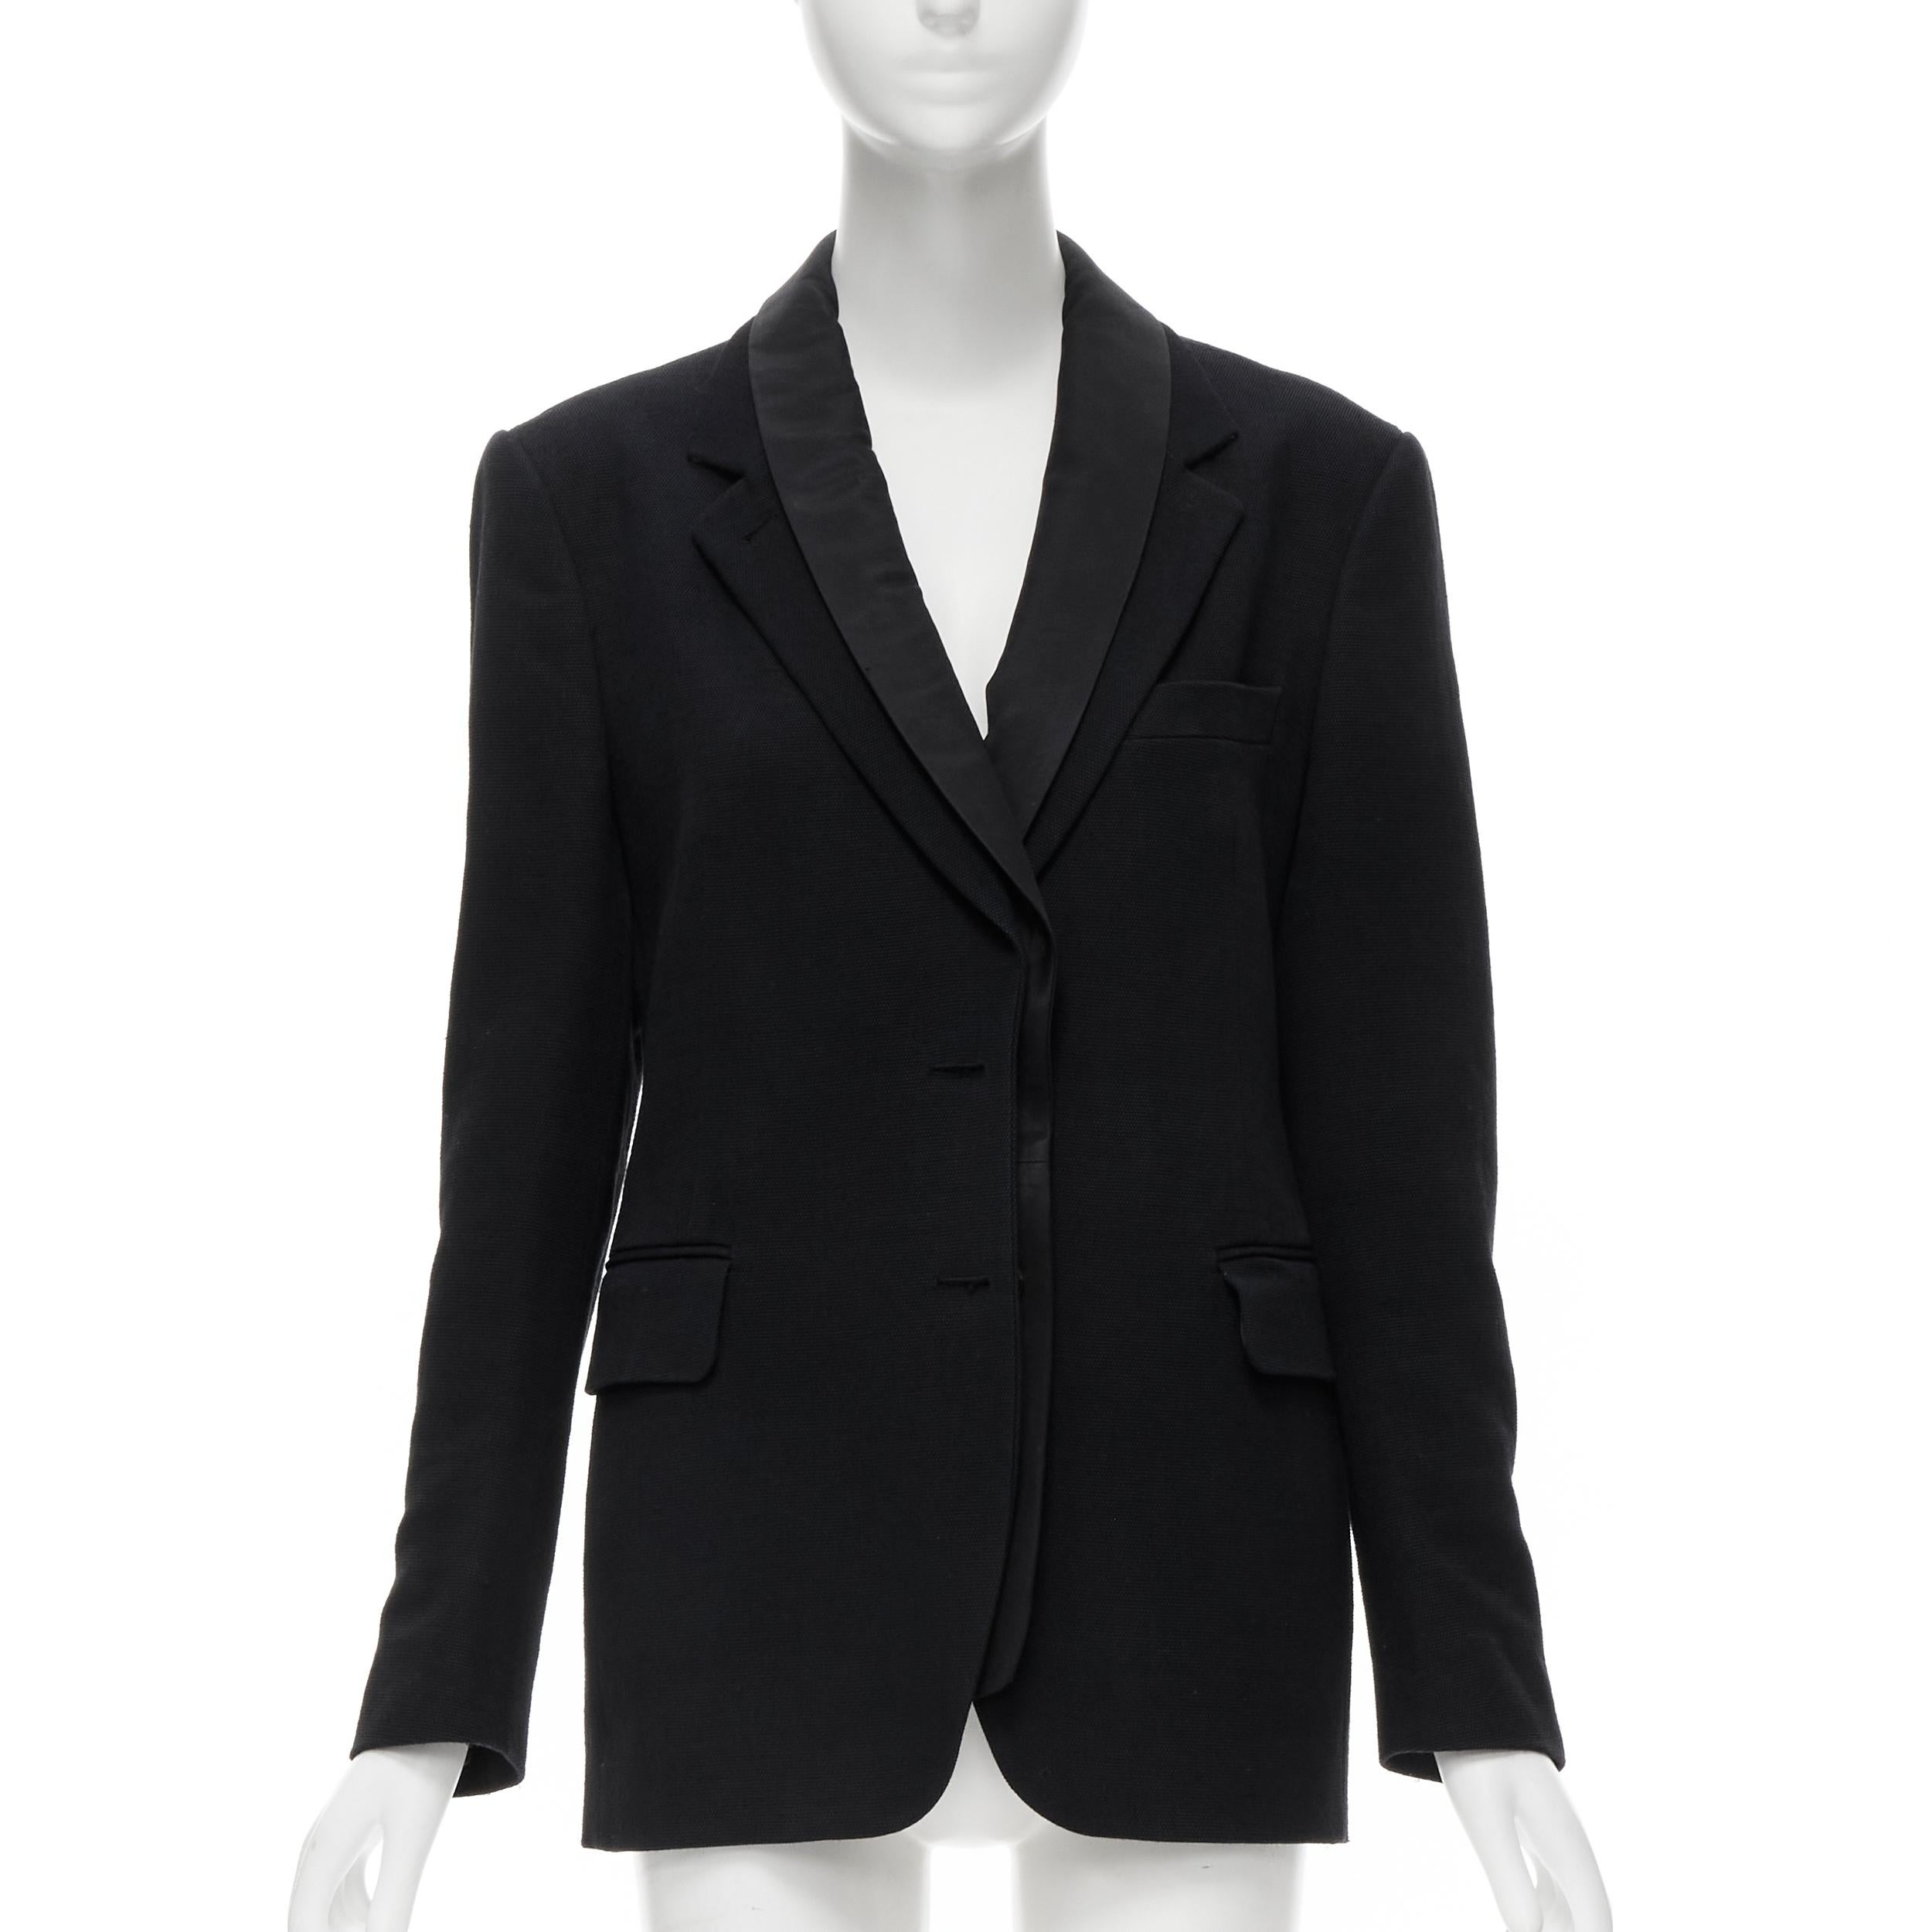 suit jacket with no collar